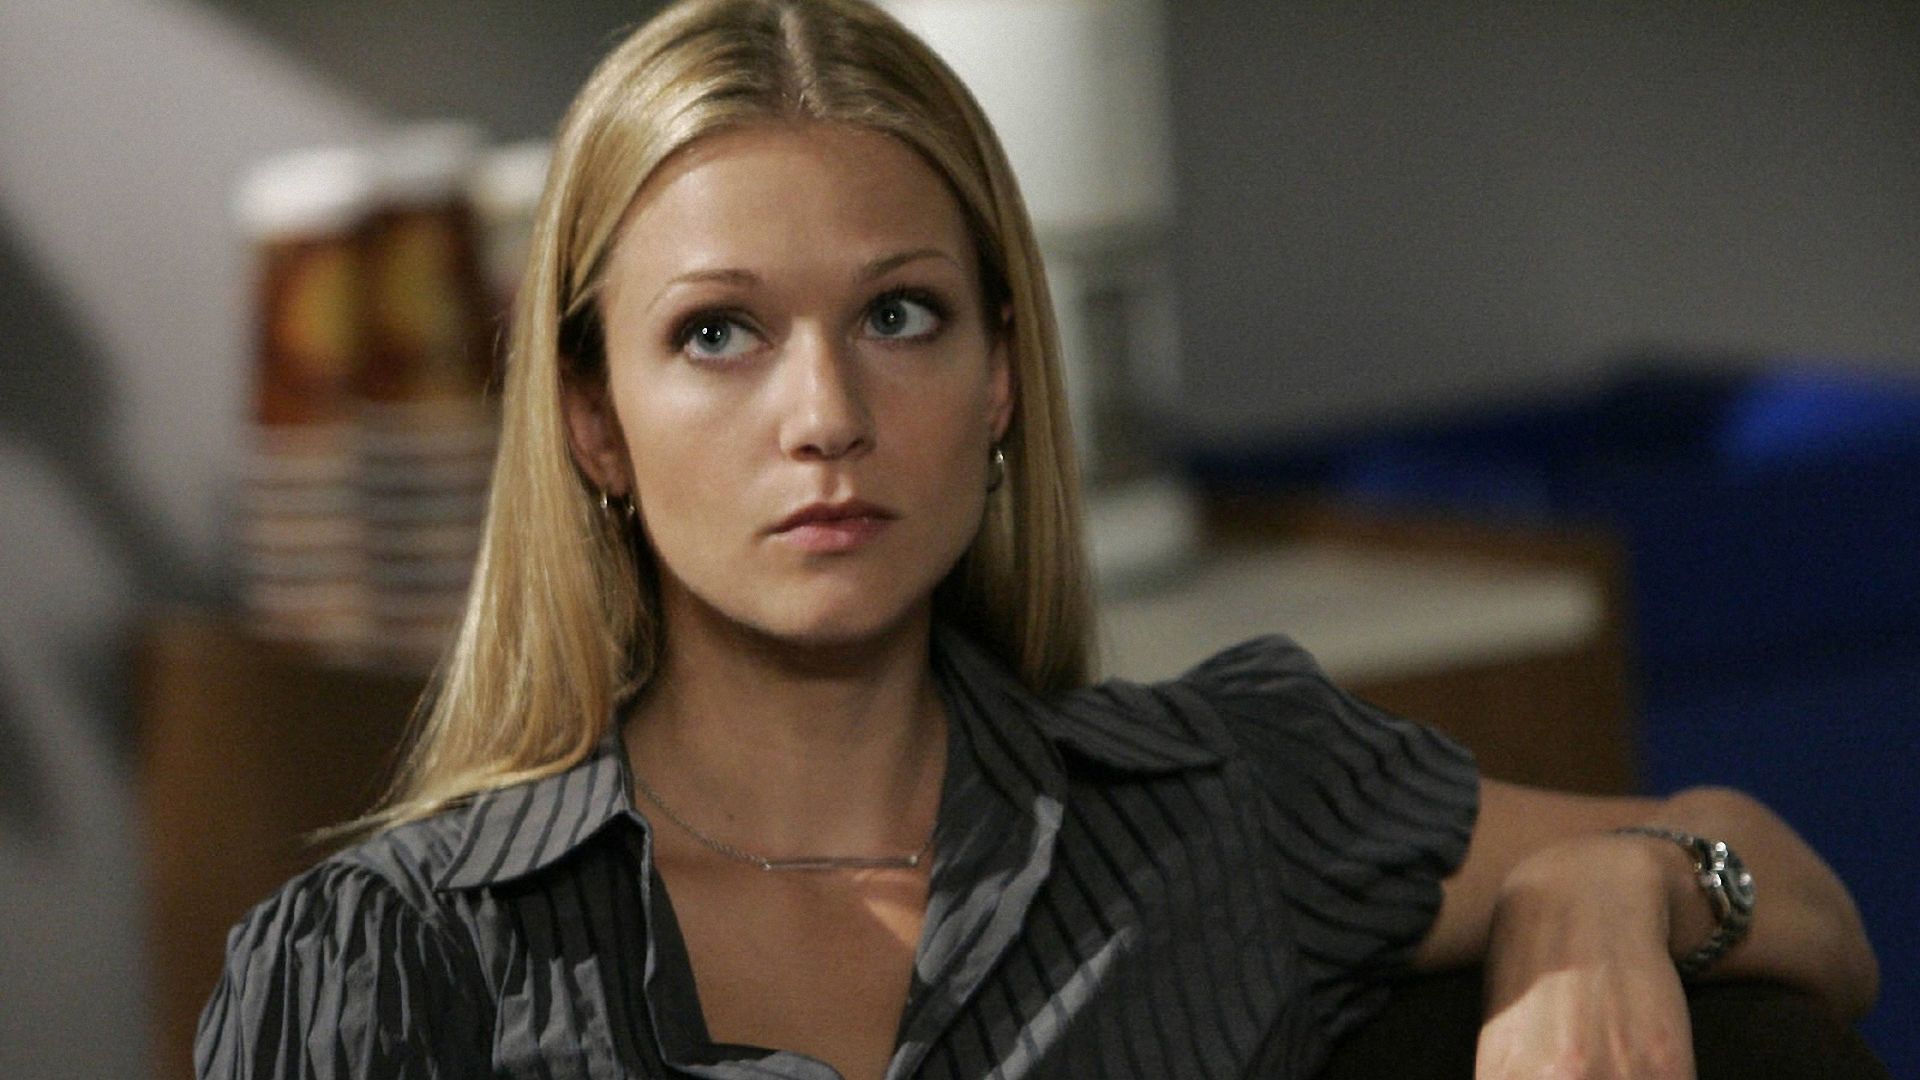 Cook Background. A.J. Cook Wallpaper, Cook Medical Wallpaper and Criminal Minds AJ Cook Wallpaper